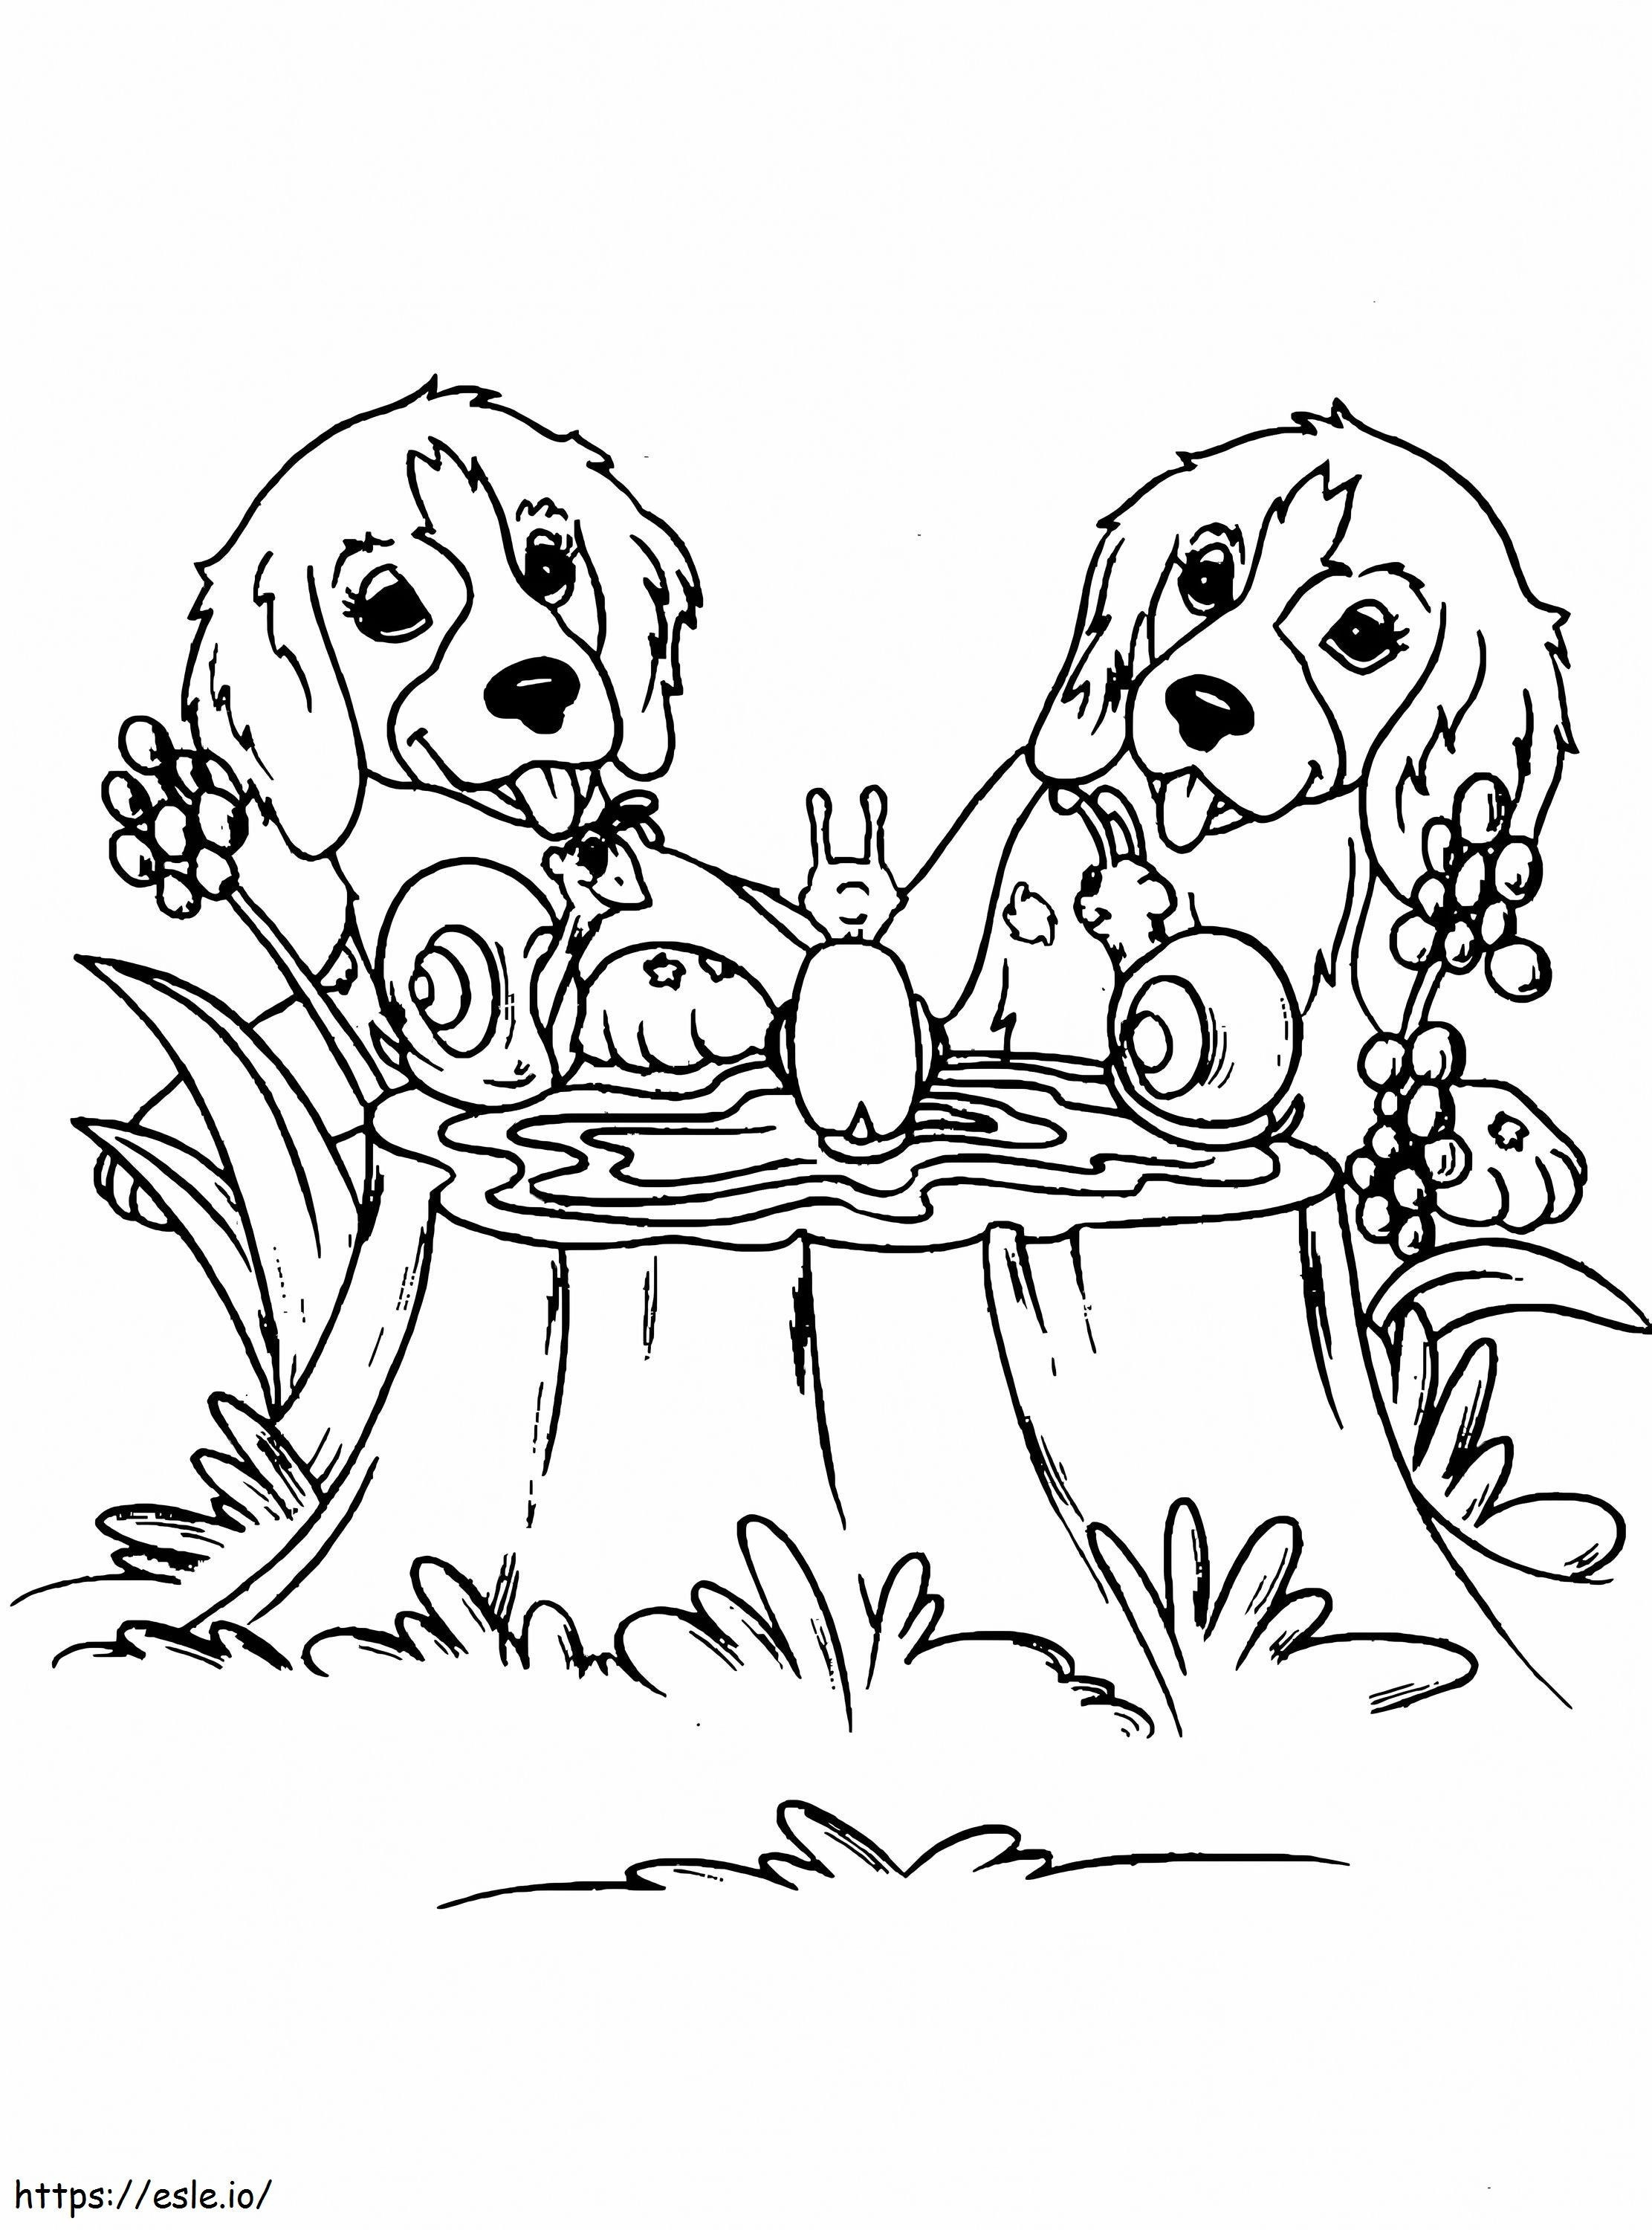 Double Dog With Snails coloring page